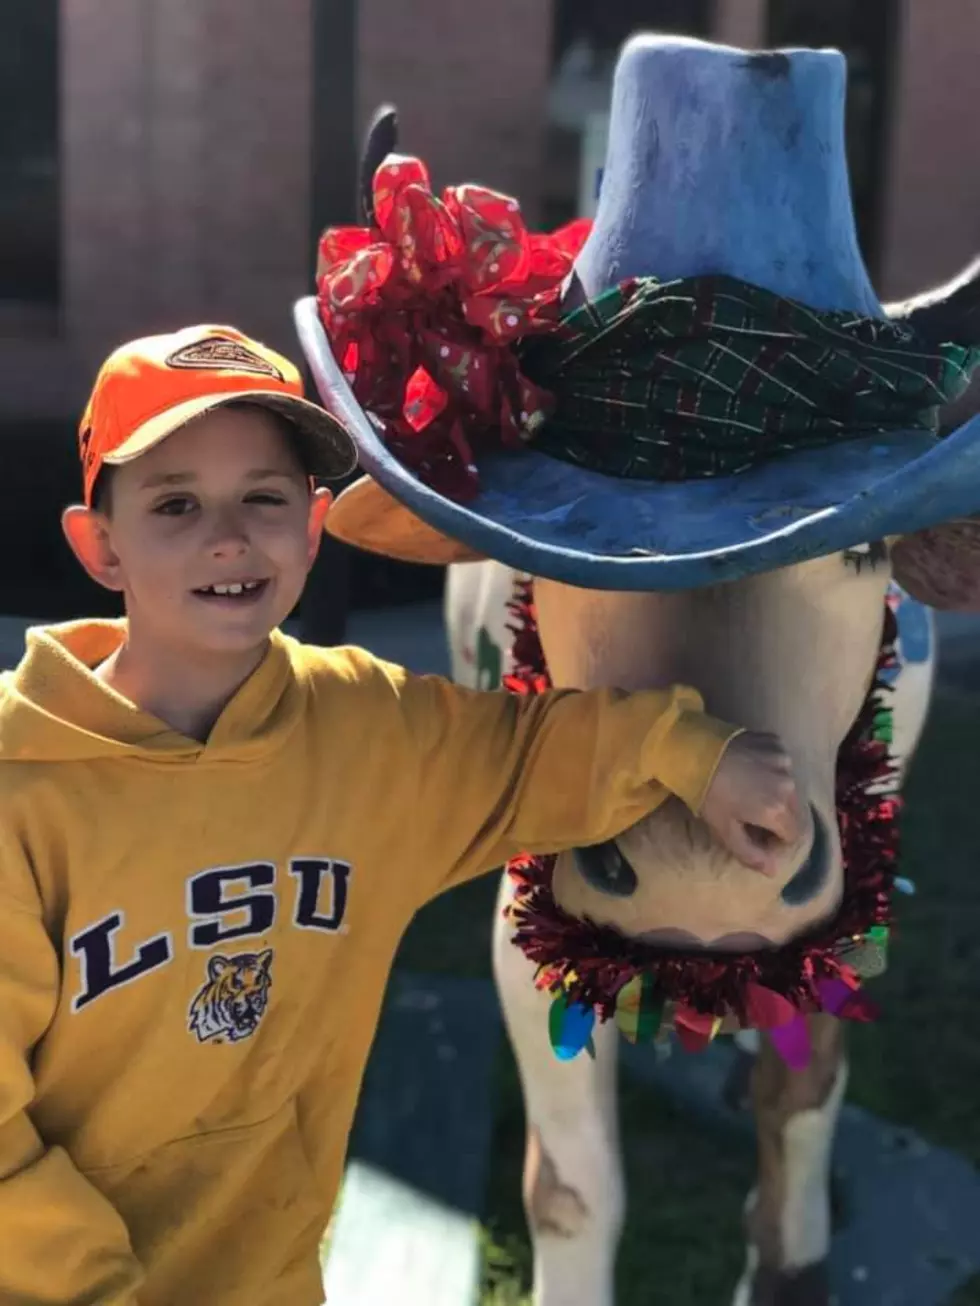 [UPDATE] Louisiana Boy With Cancer Who Asked For Christmas Cards Has Passed Away